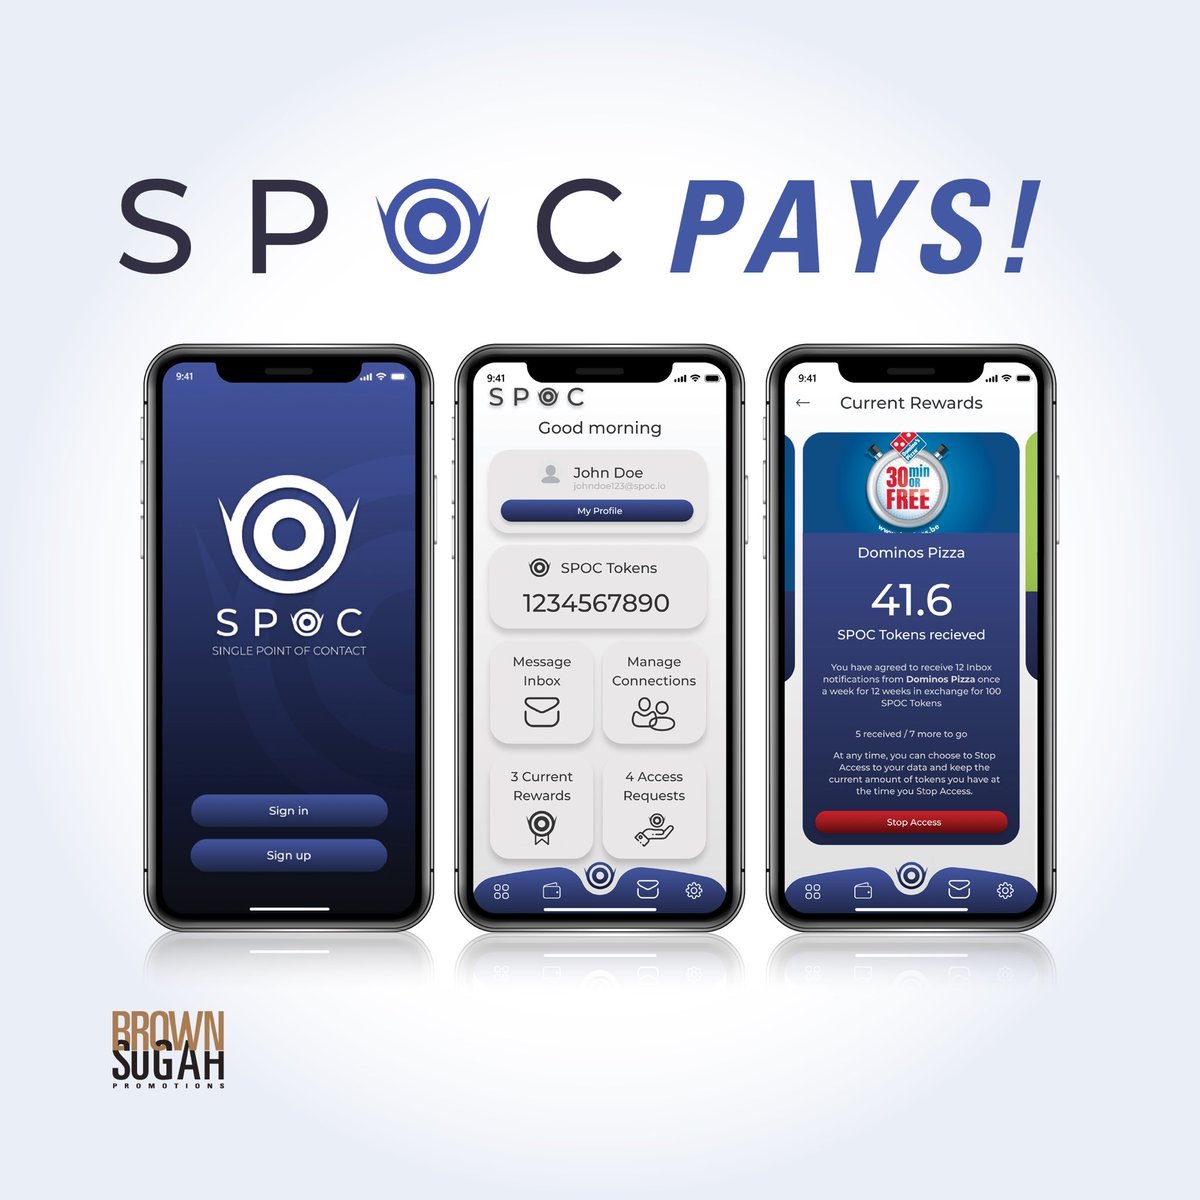 COMING SOON: Spoc Pays! Using the $SPOC token as a method of rewarding users to share their #data and connect businesses. #dataprivacy #crmsoftware #ecommerce #Web3 #NFTs